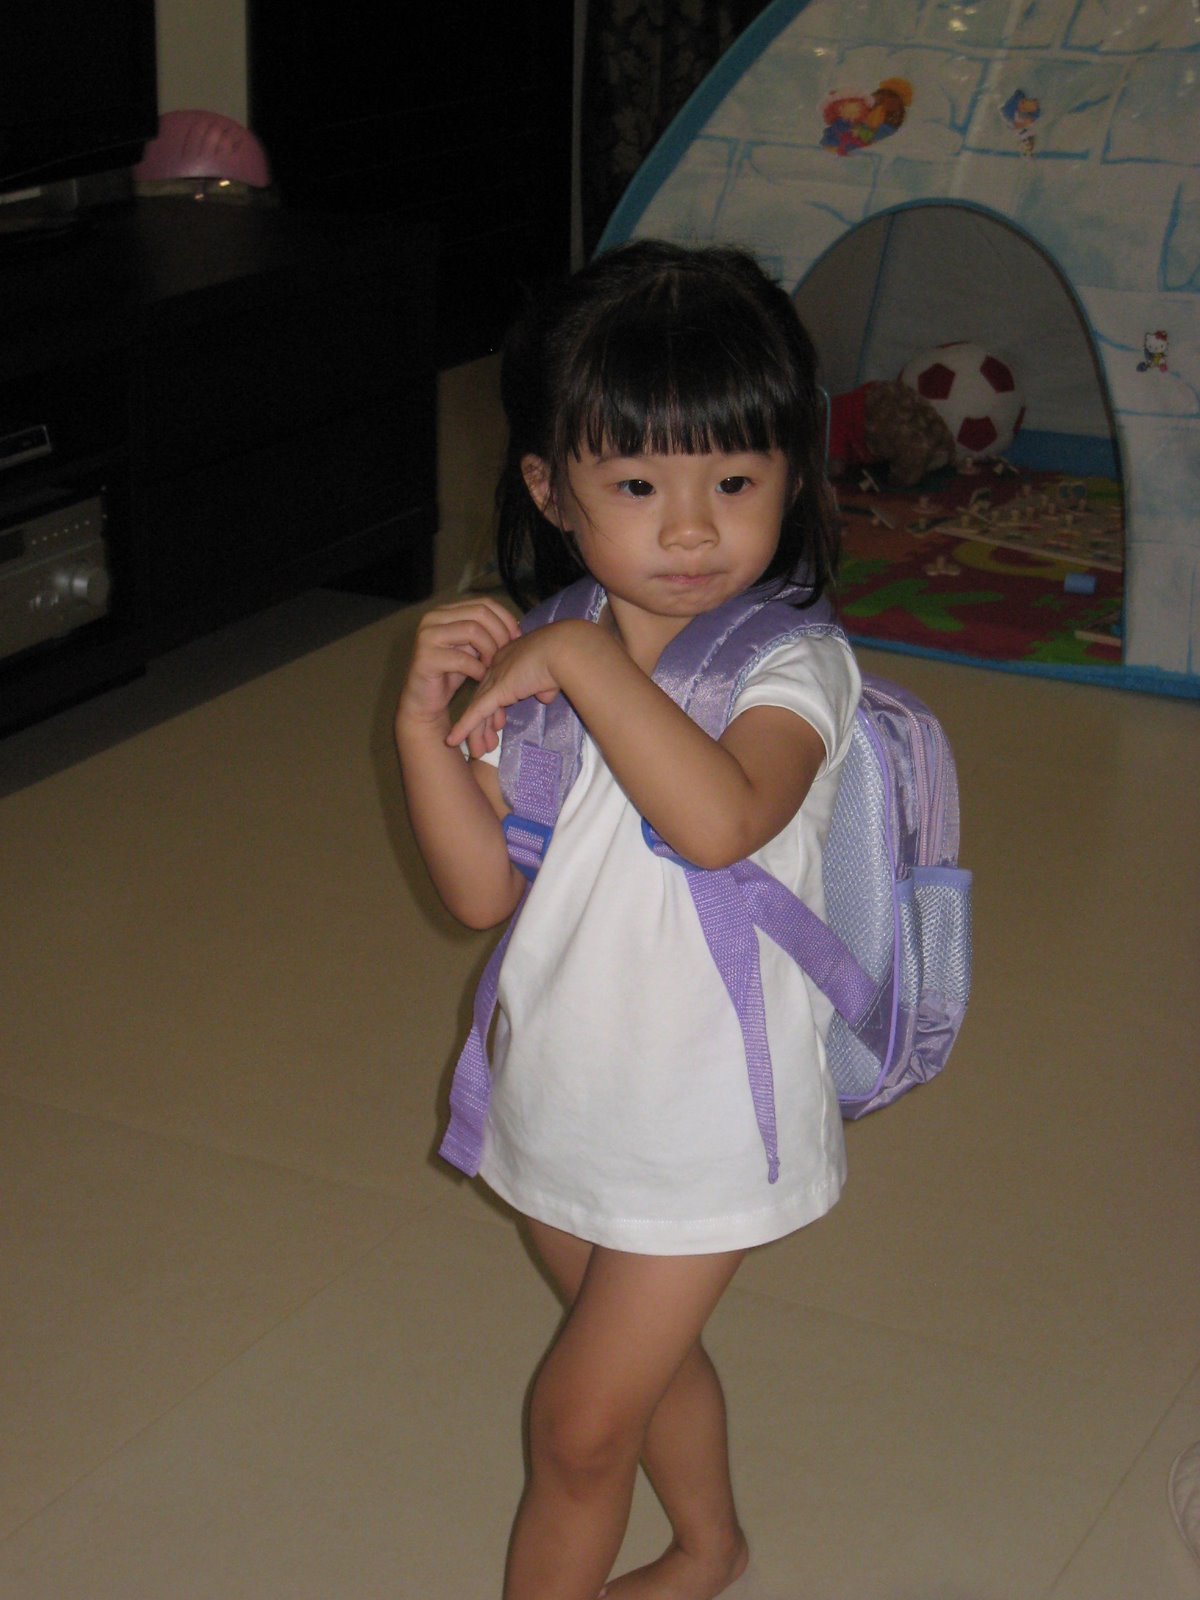 [Carrying+the+Barney+bag+at+home.JPG]